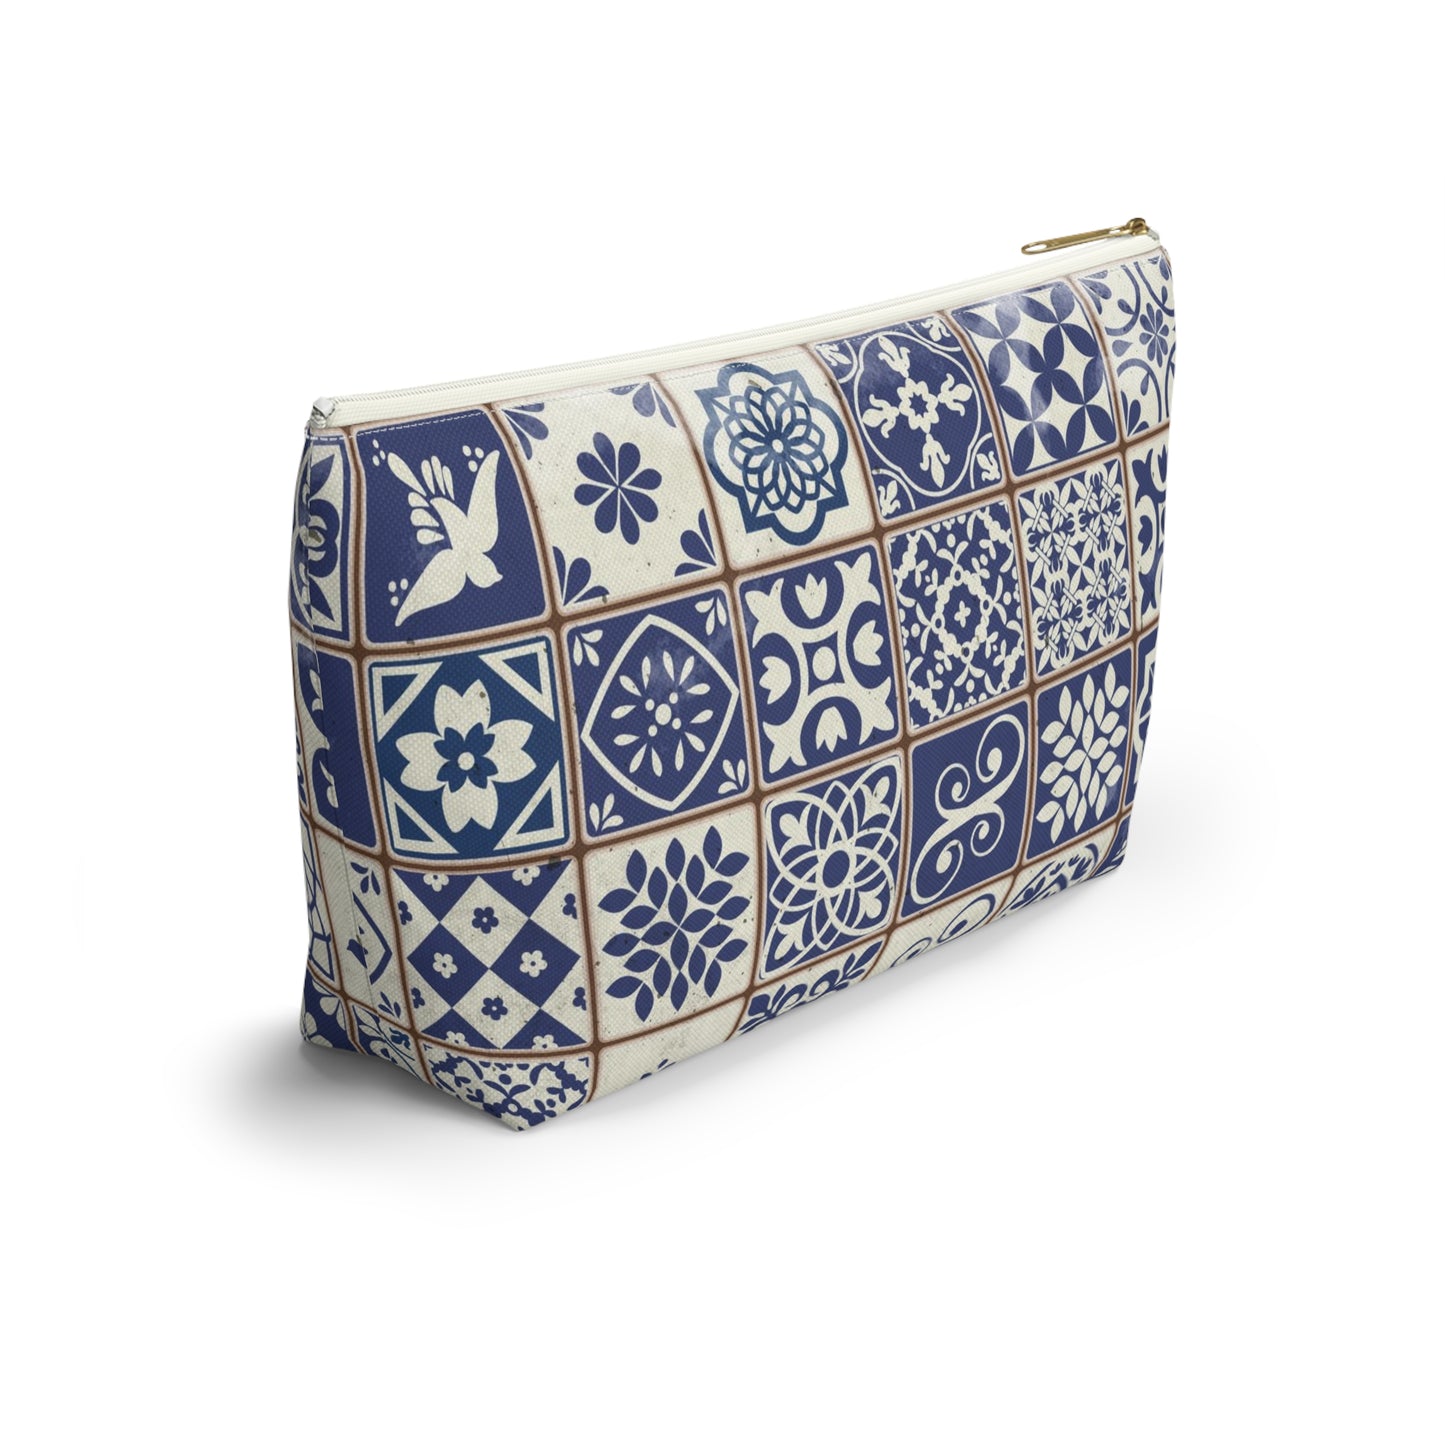 Portuguese Tile Pouch - The Global Wanderer